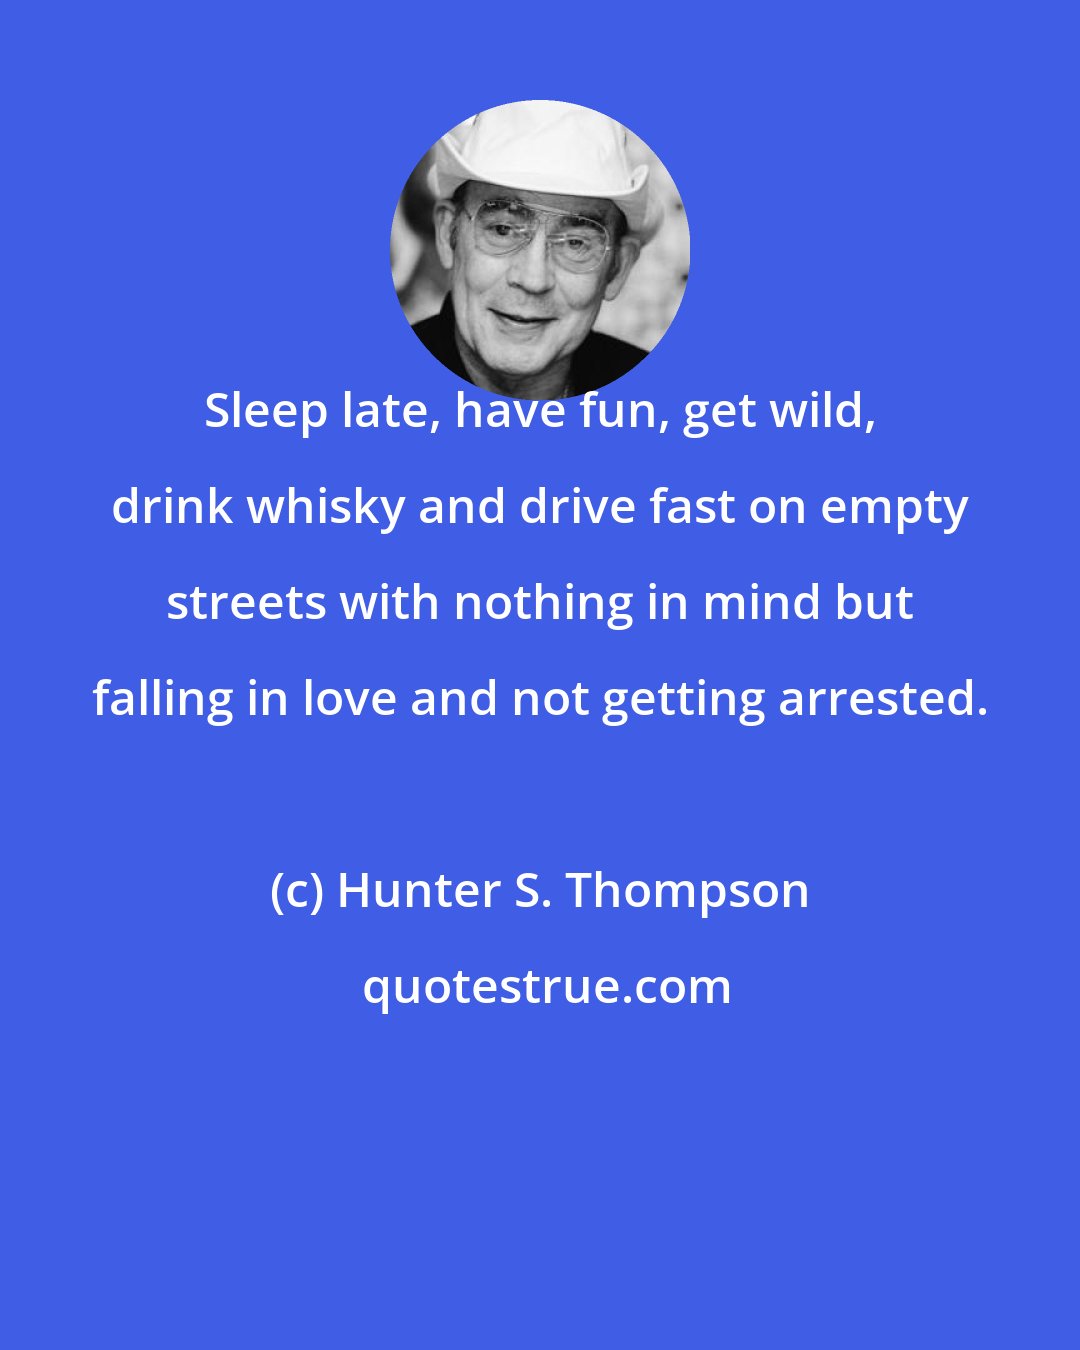 Hunter S. Thompson: Sleep late, have fun, get wild, drink whisky and drive fast on empty streets with nothing in mind but falling in love and not getting arrested.